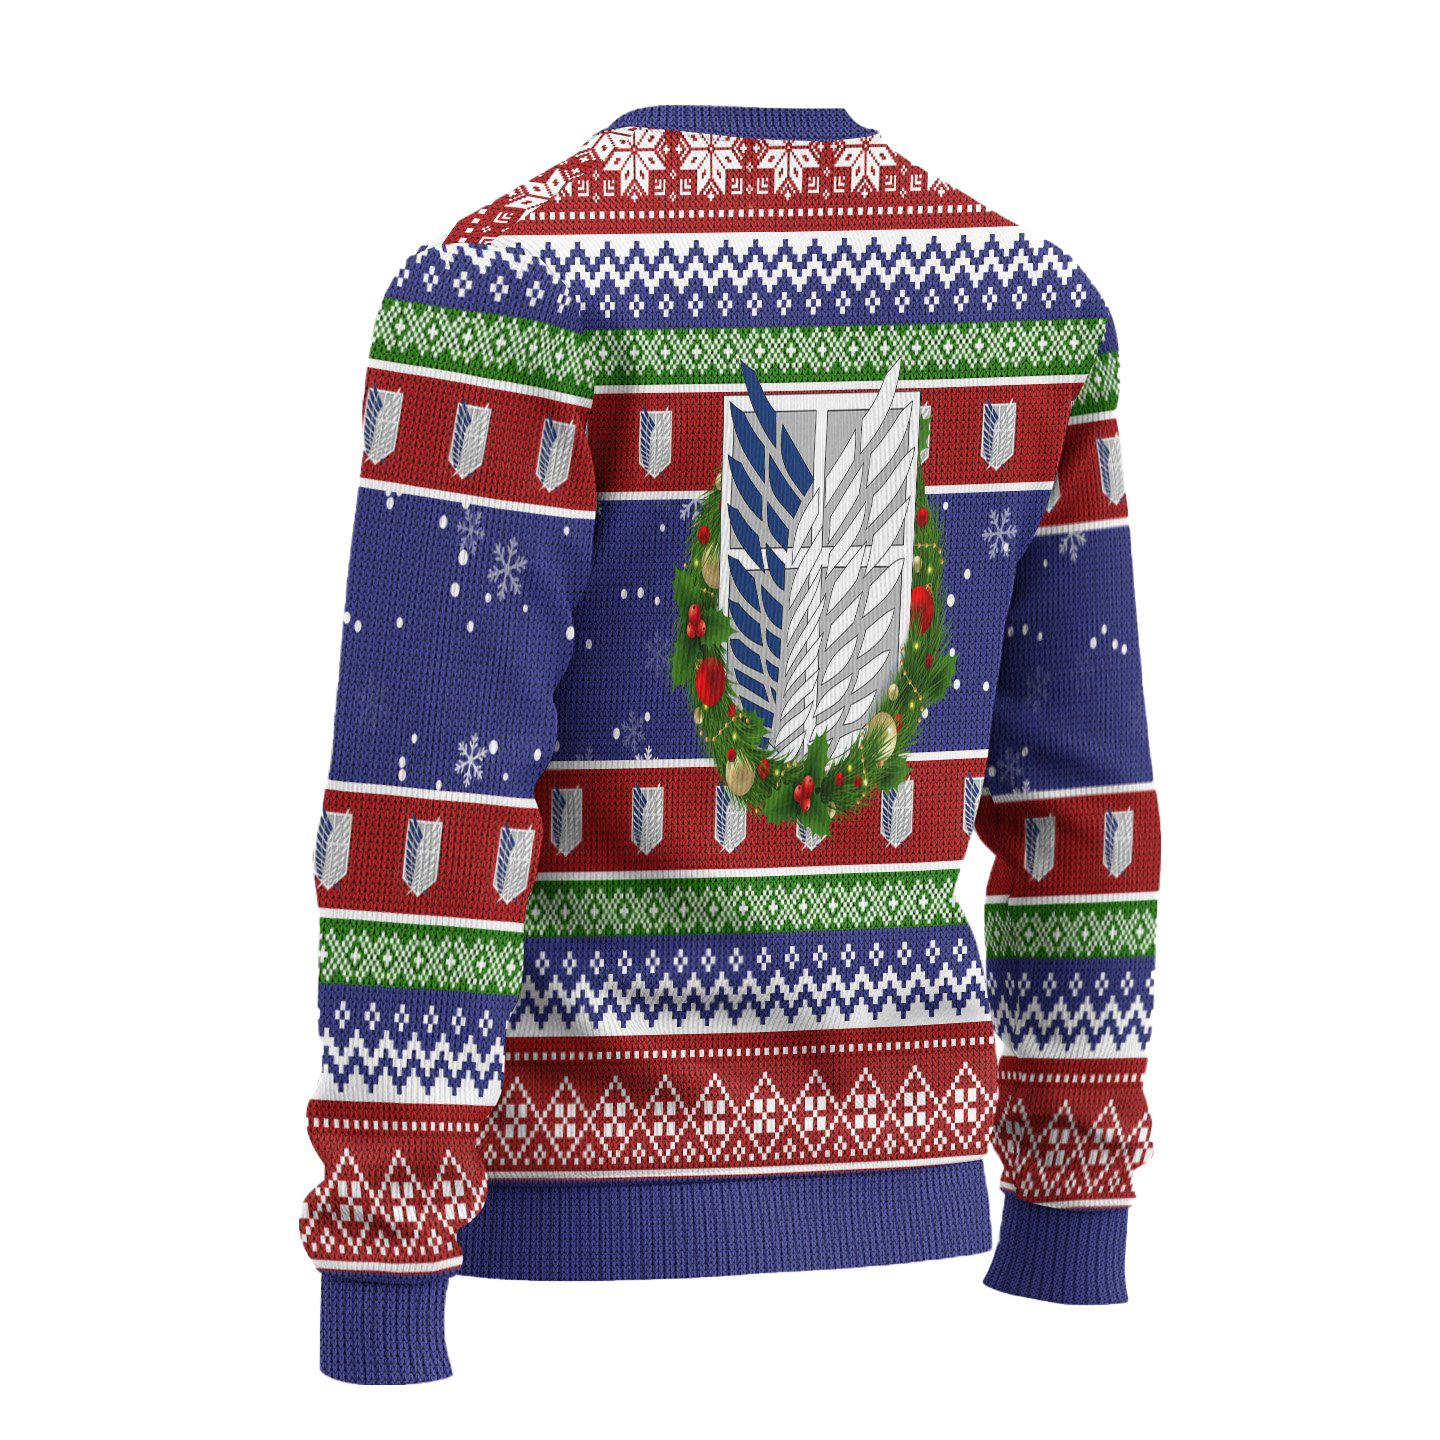 Scout Regiment Attack on Titan Anime Ugly Christmas Sweater Xmas Gift